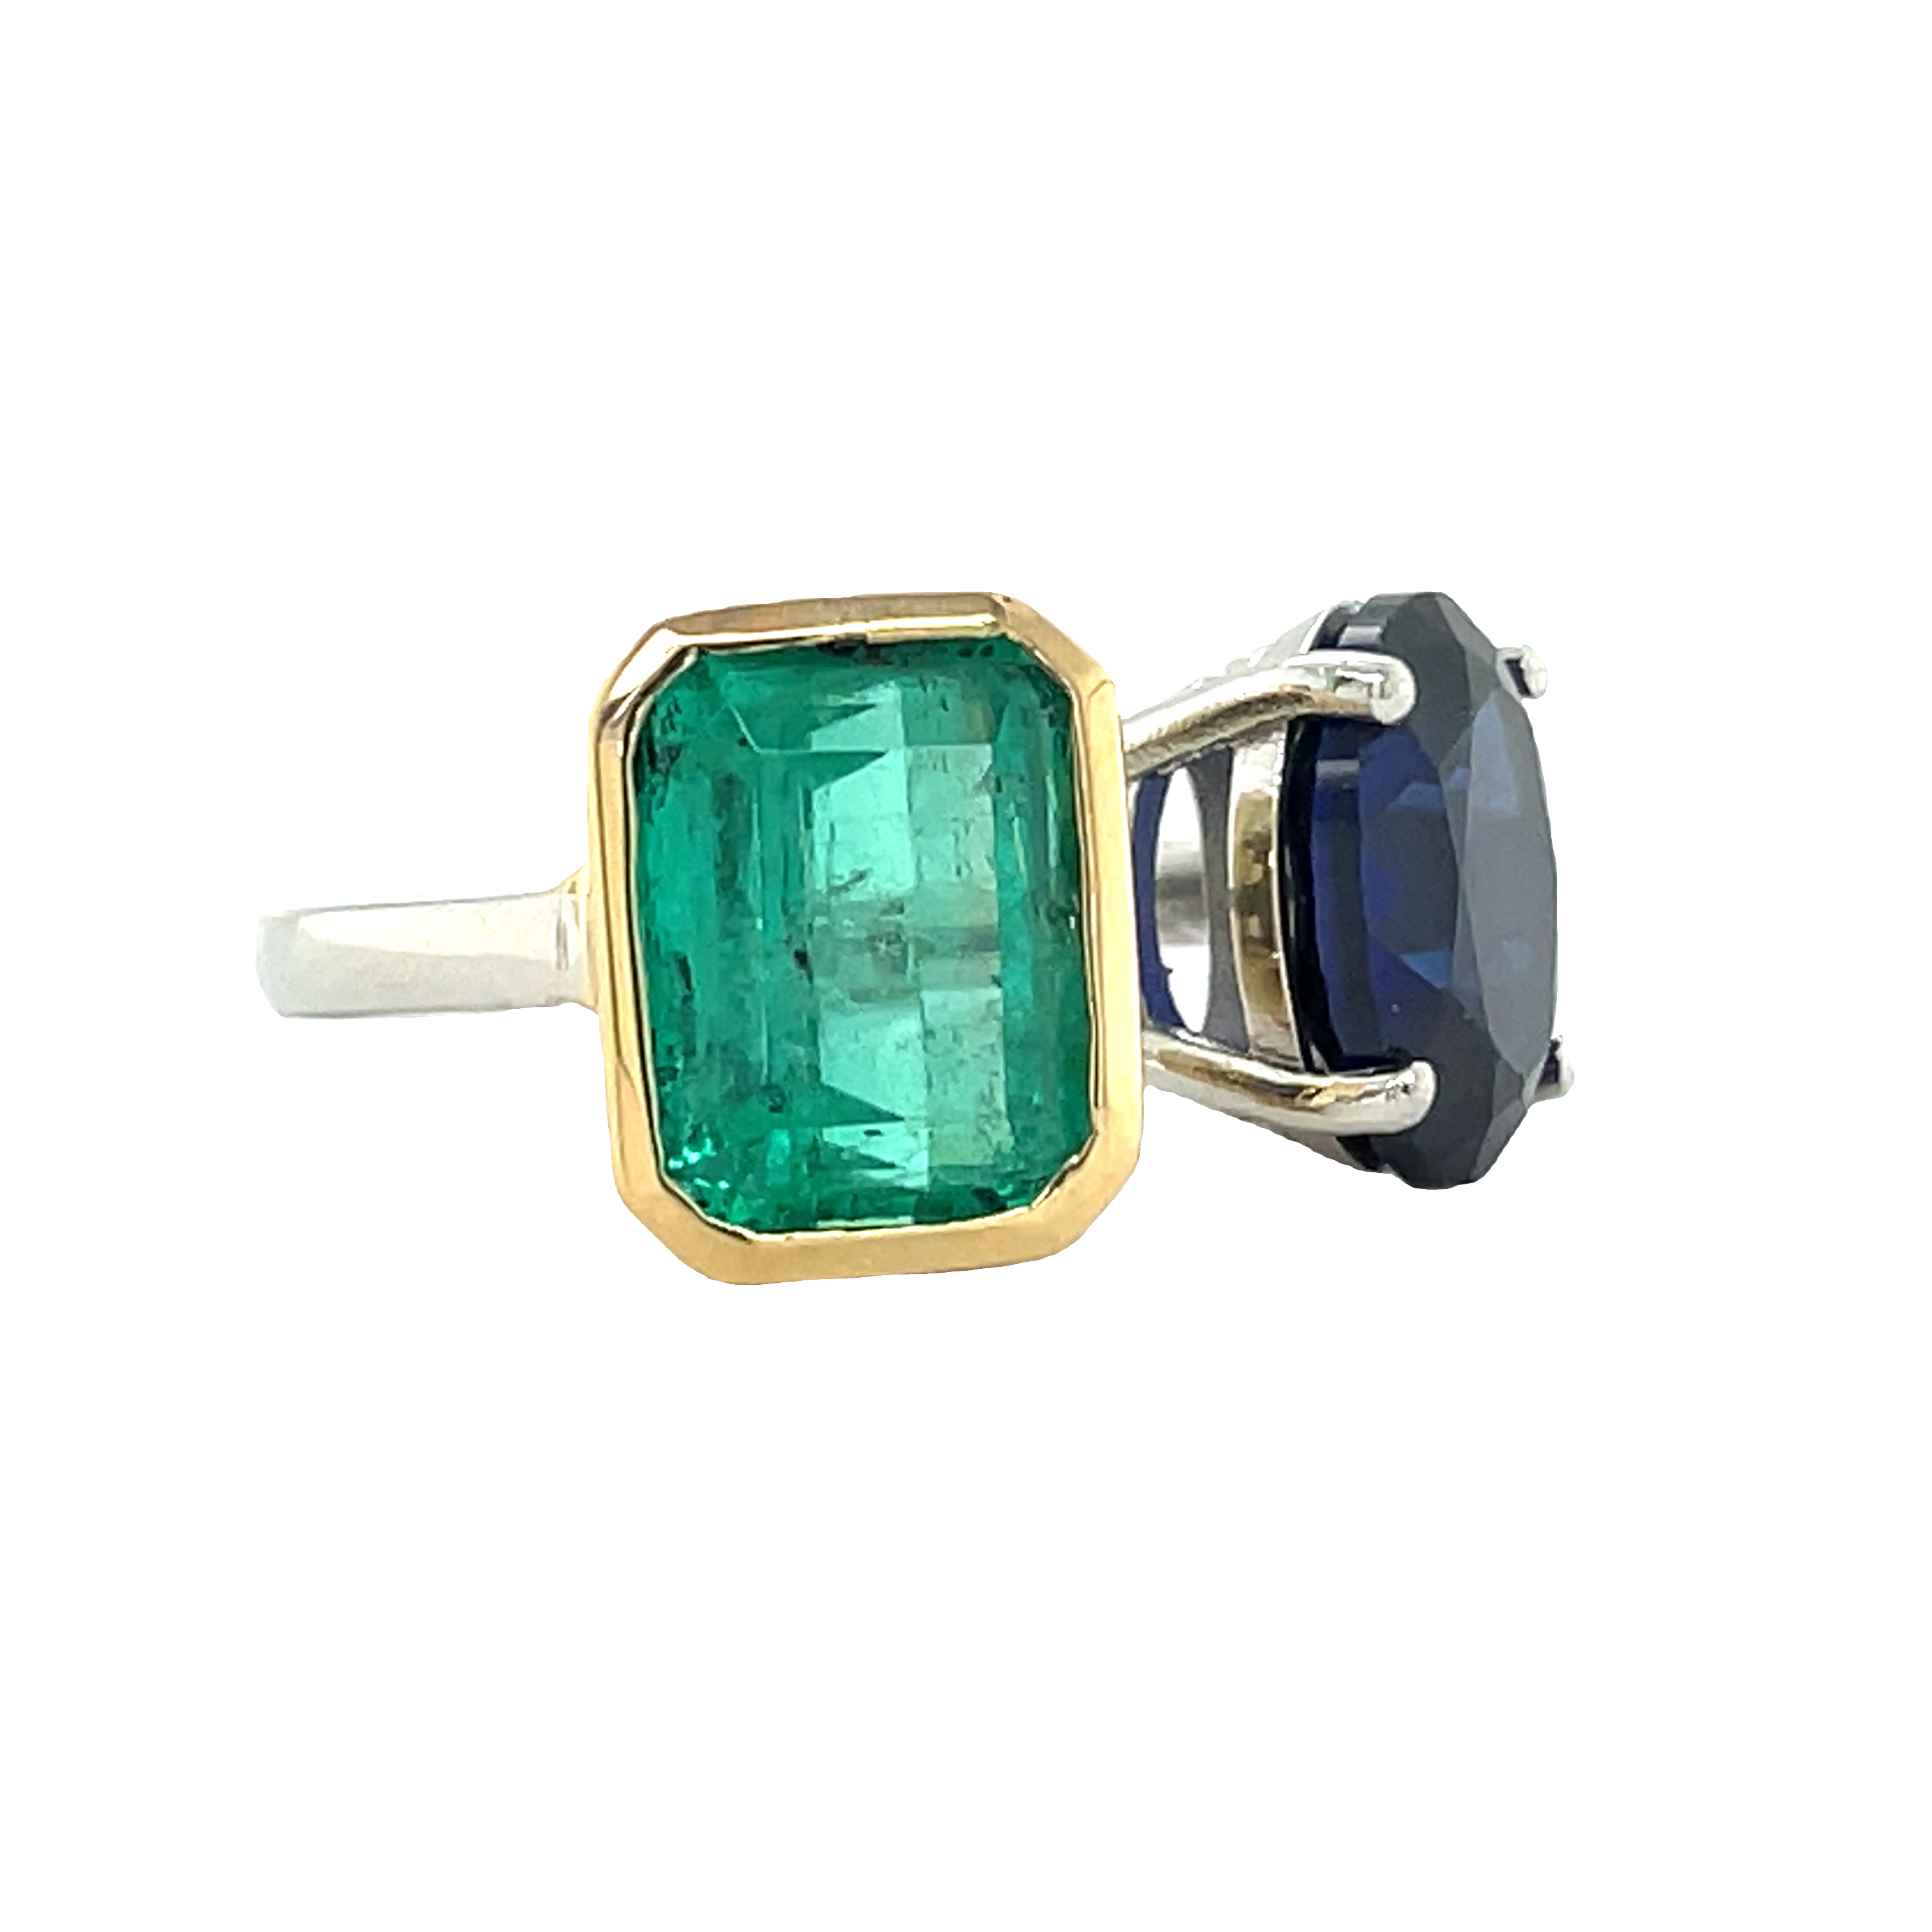 Beautiful custom made ring  Platinum & 18k yellow gold setting  Colombian emerald (emerald cut) 4.71 cts bezel set in yellow gold  Oval tanzanite 3.62 cts set four prong basket.  Toi & Moi design  12.00 x 12.00 mm   2.30 mm wide  Size 6.5 (sizeable)